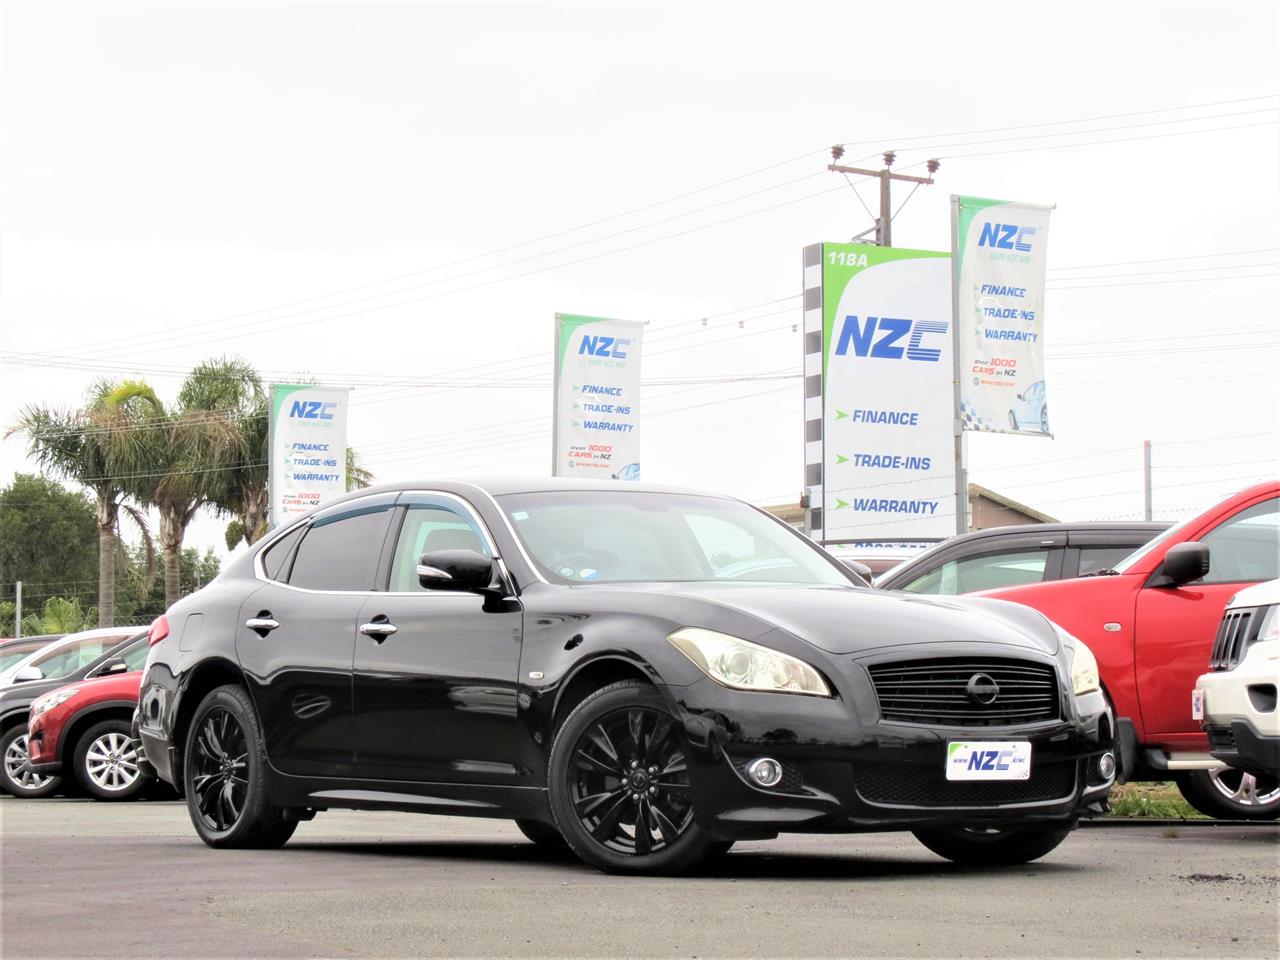 NZC 2009 Nissan FUGA just arrived to Auckland